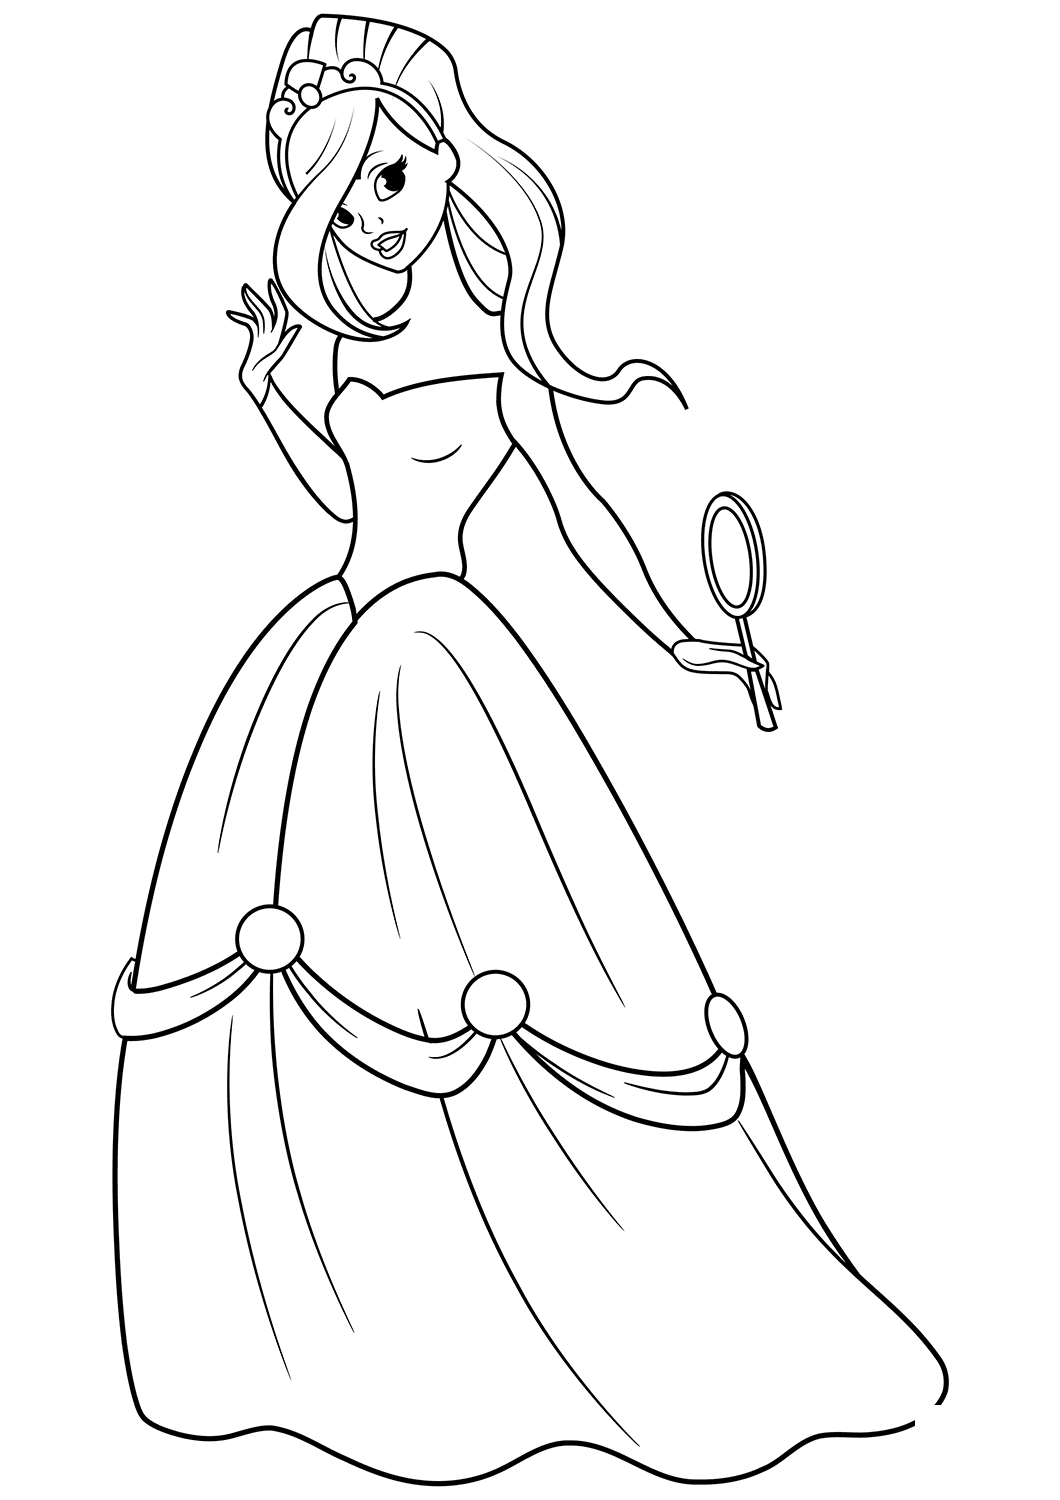 Beautiful Princess With Mirror In Her Hand Coloring Page